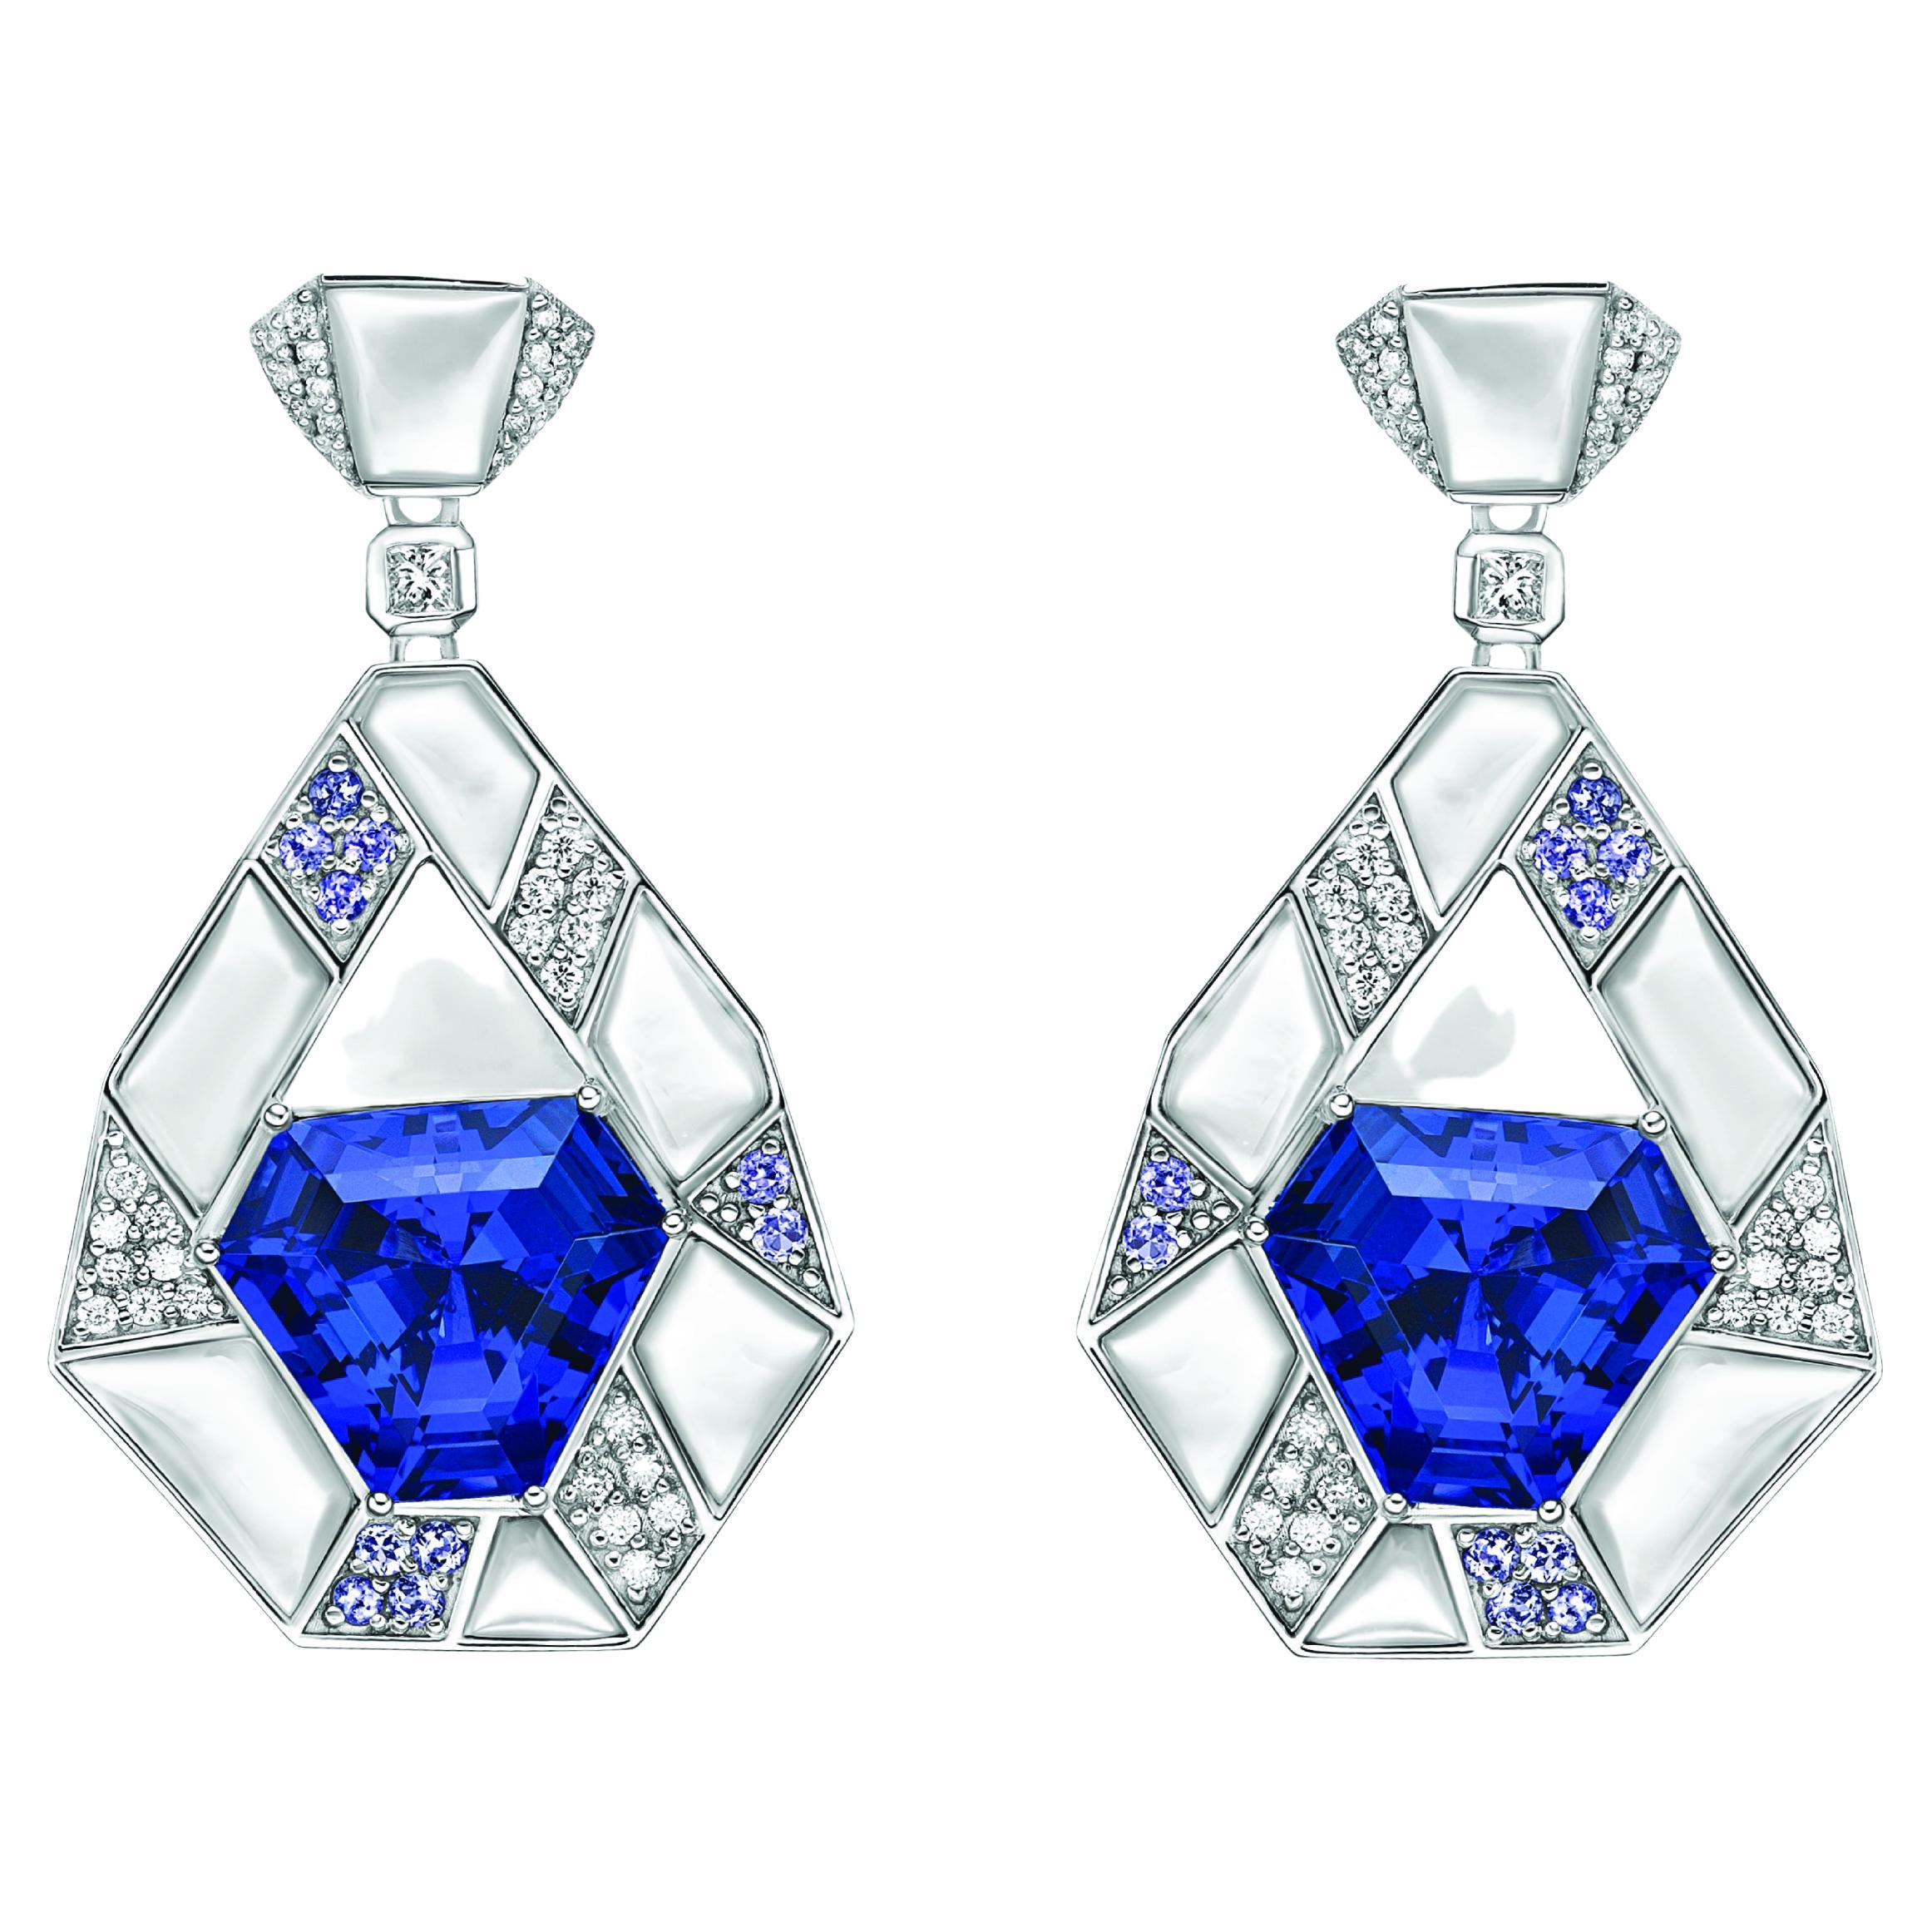 15.93 Carat Tanzanite Drop Earrings in 18KWG with Mother of Pearl and Diamond. For Sale